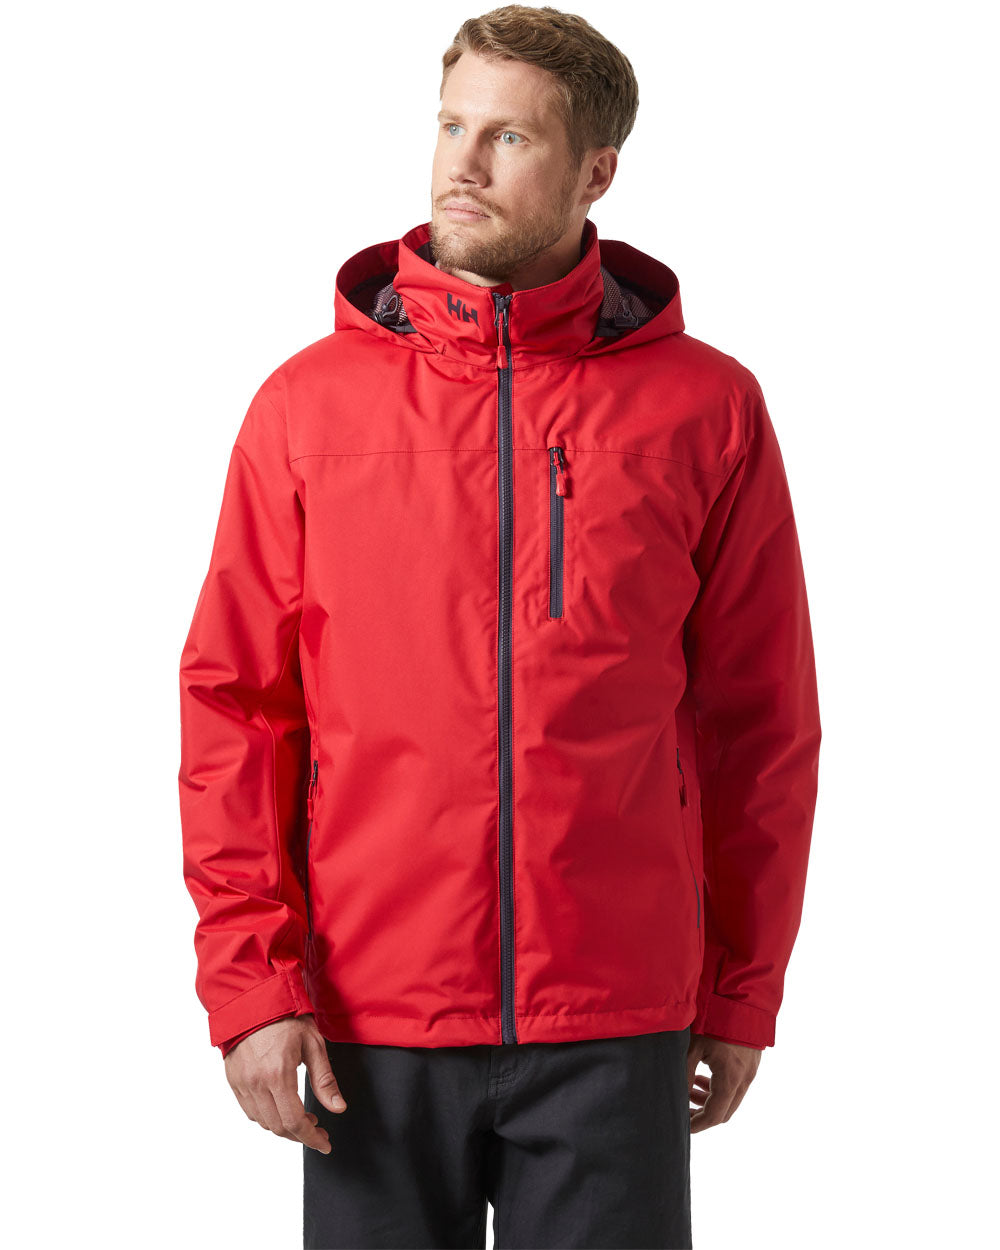 Red coloured Helly Hansen Mens Crew Hooded Midlayer Jacket on white background 